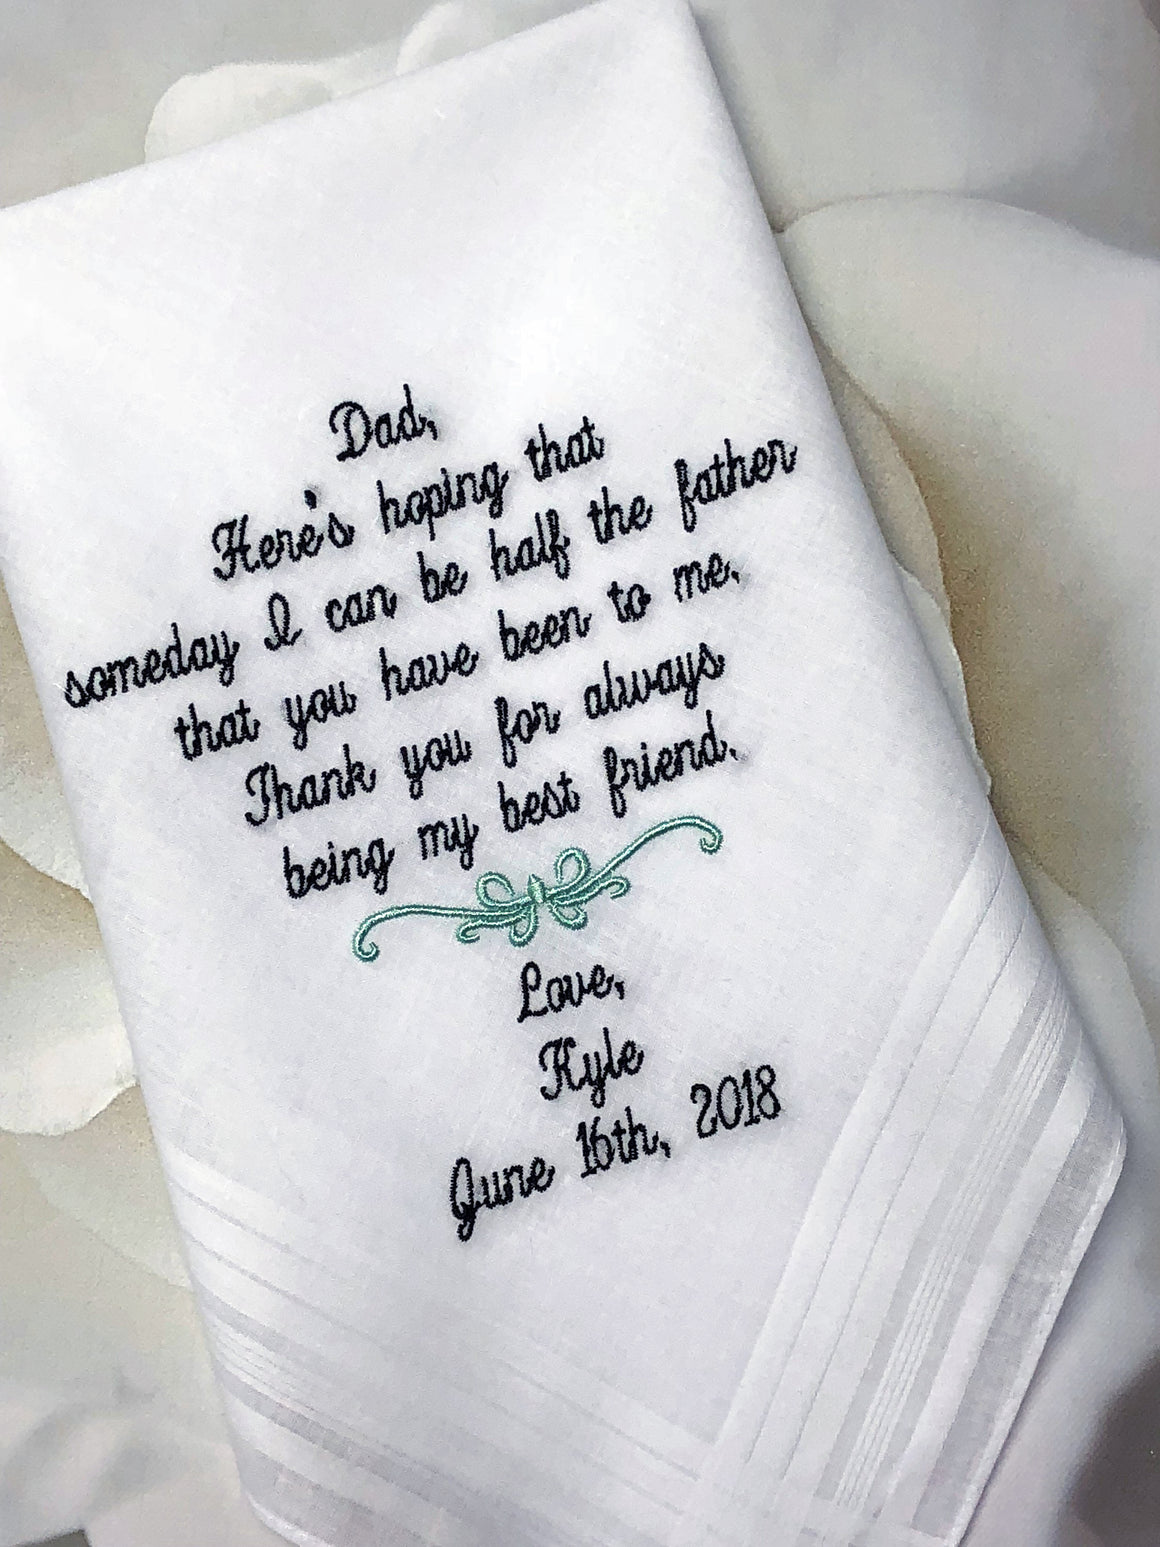 Wedding Handkerchief. Personalized Father of the Bride Wedding Gift -Father In Law Wedding Handkerchief. CUSTOMIZED~EMBROIDERED Hankies